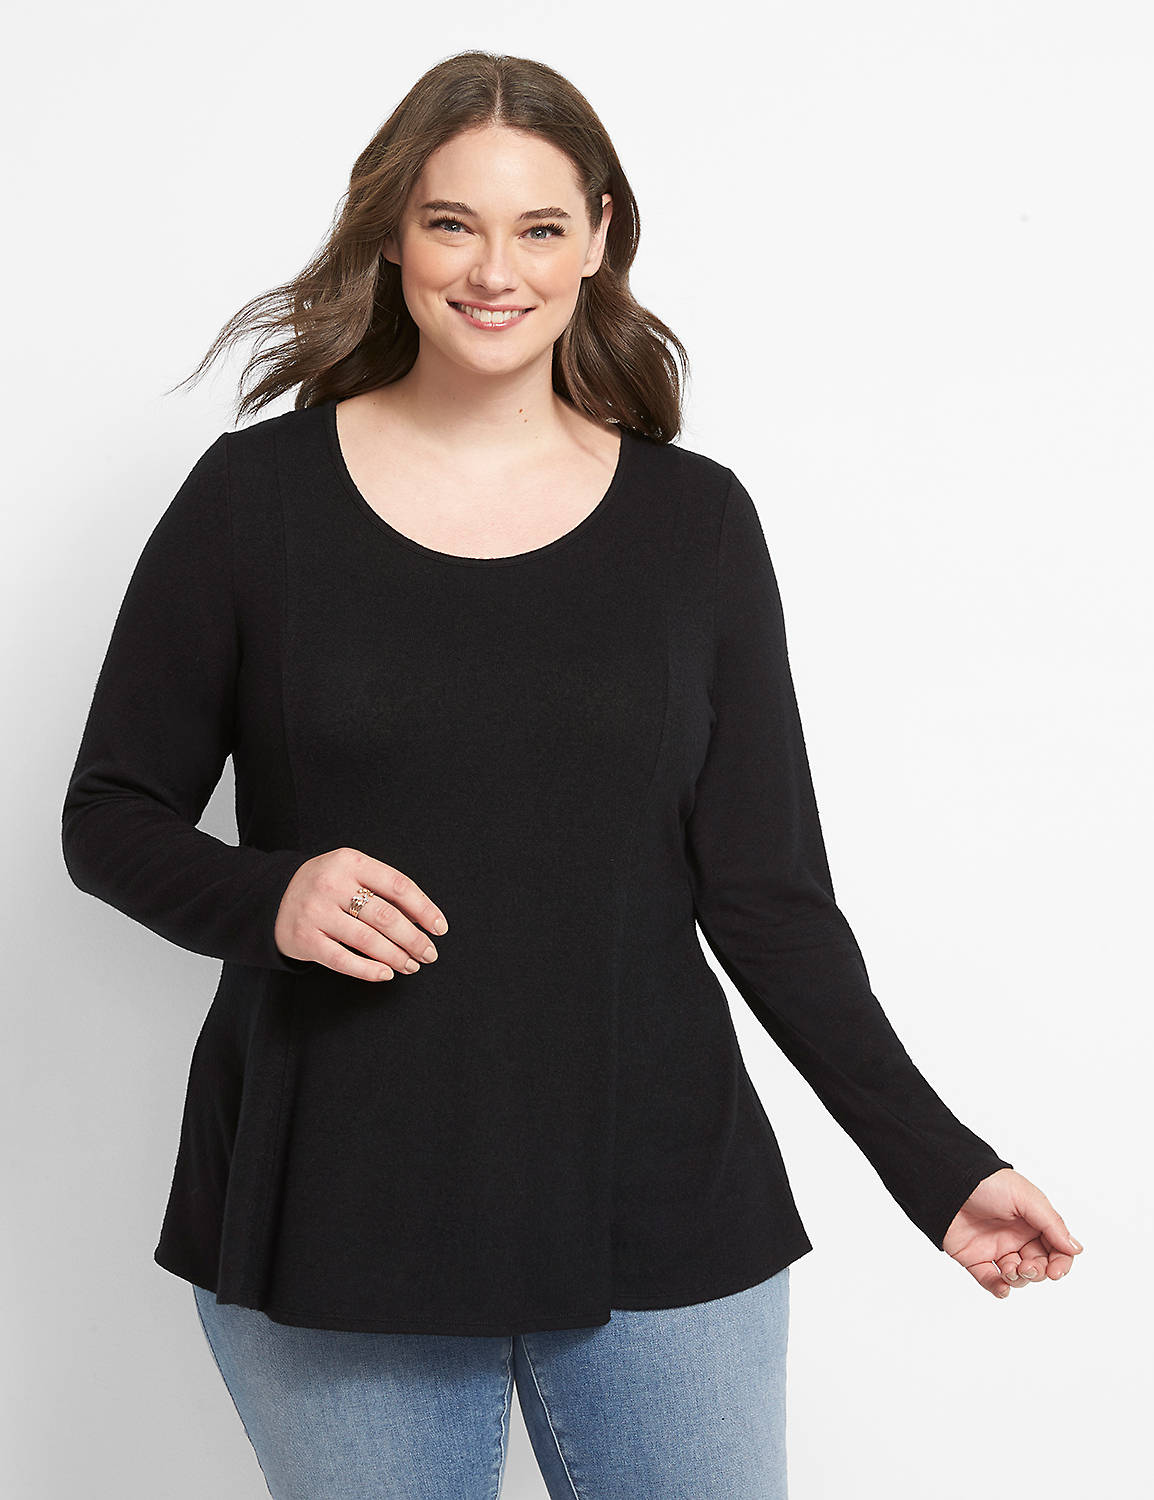 Long Sleeve Scoop Neck Fit and Flare Hacci Top Solid 1123730:Ascena Black:30/32 Product Image 1